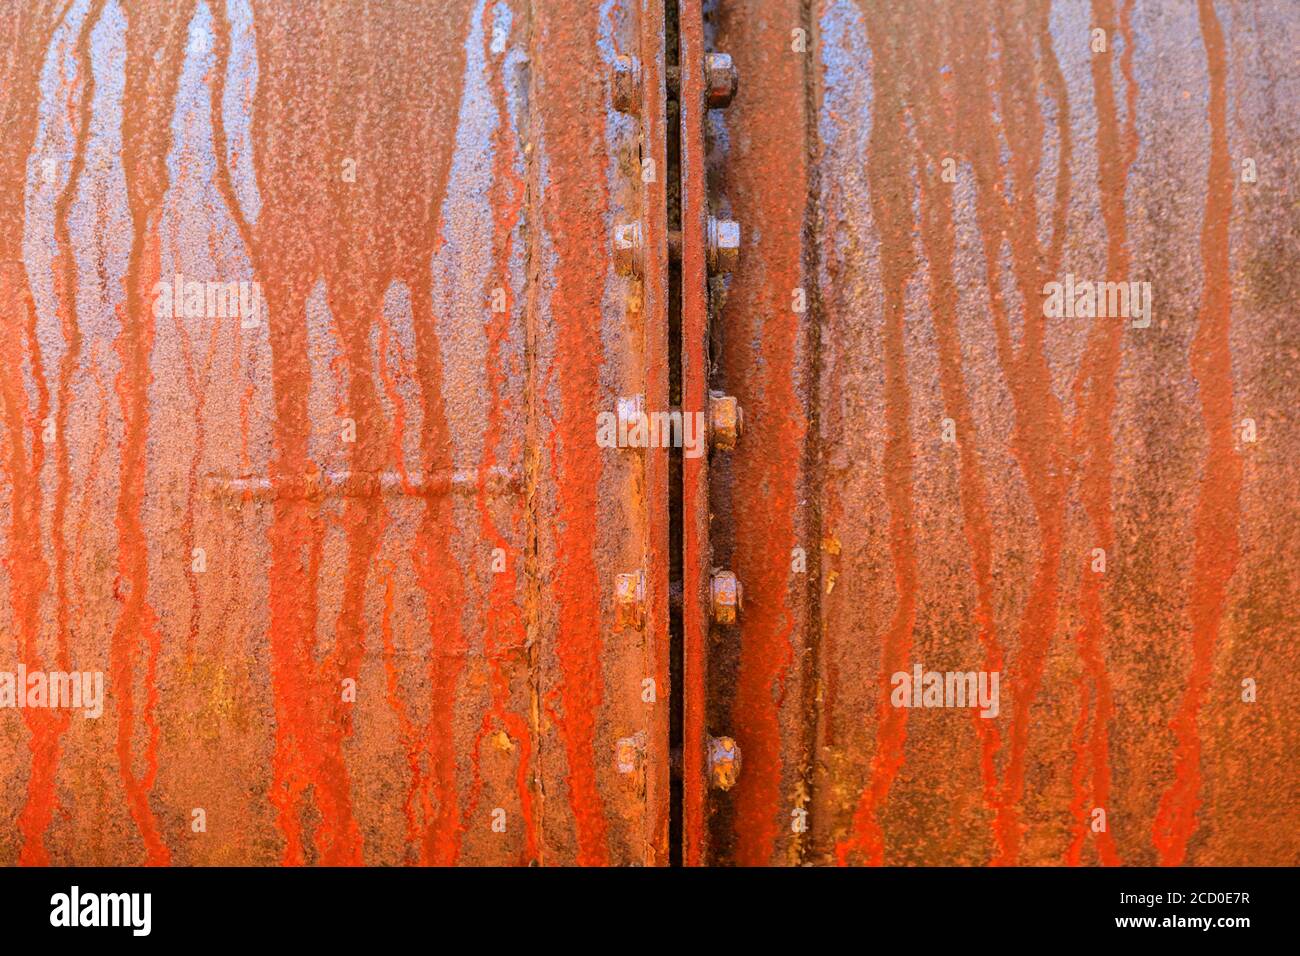 Rusty steel surface. Landschaftspark Duisburg-Nord, former ironworks and steel manufacturing, Ruhr, Germany Stock Photo